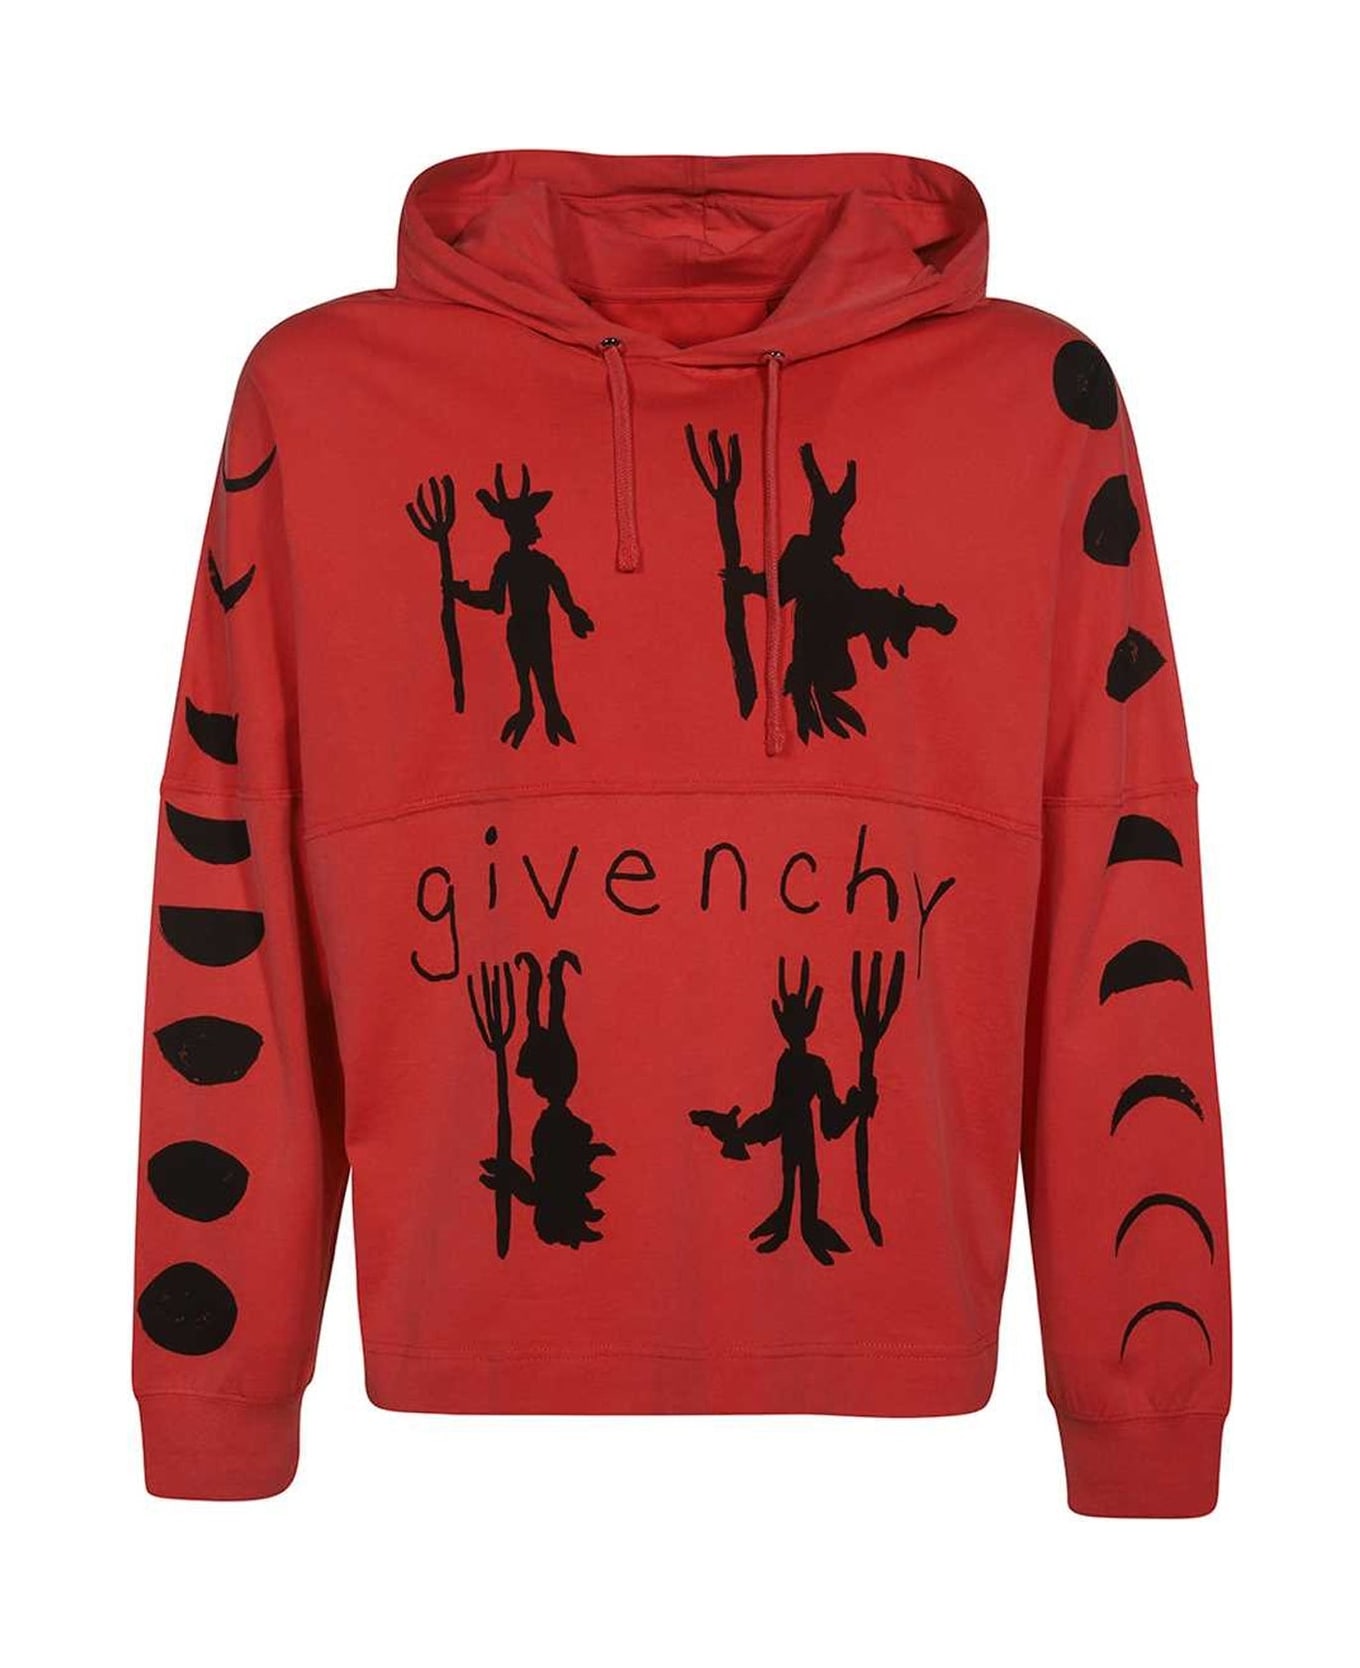 Givenchy Cotton Hooded Sweatshirt - Red フリース